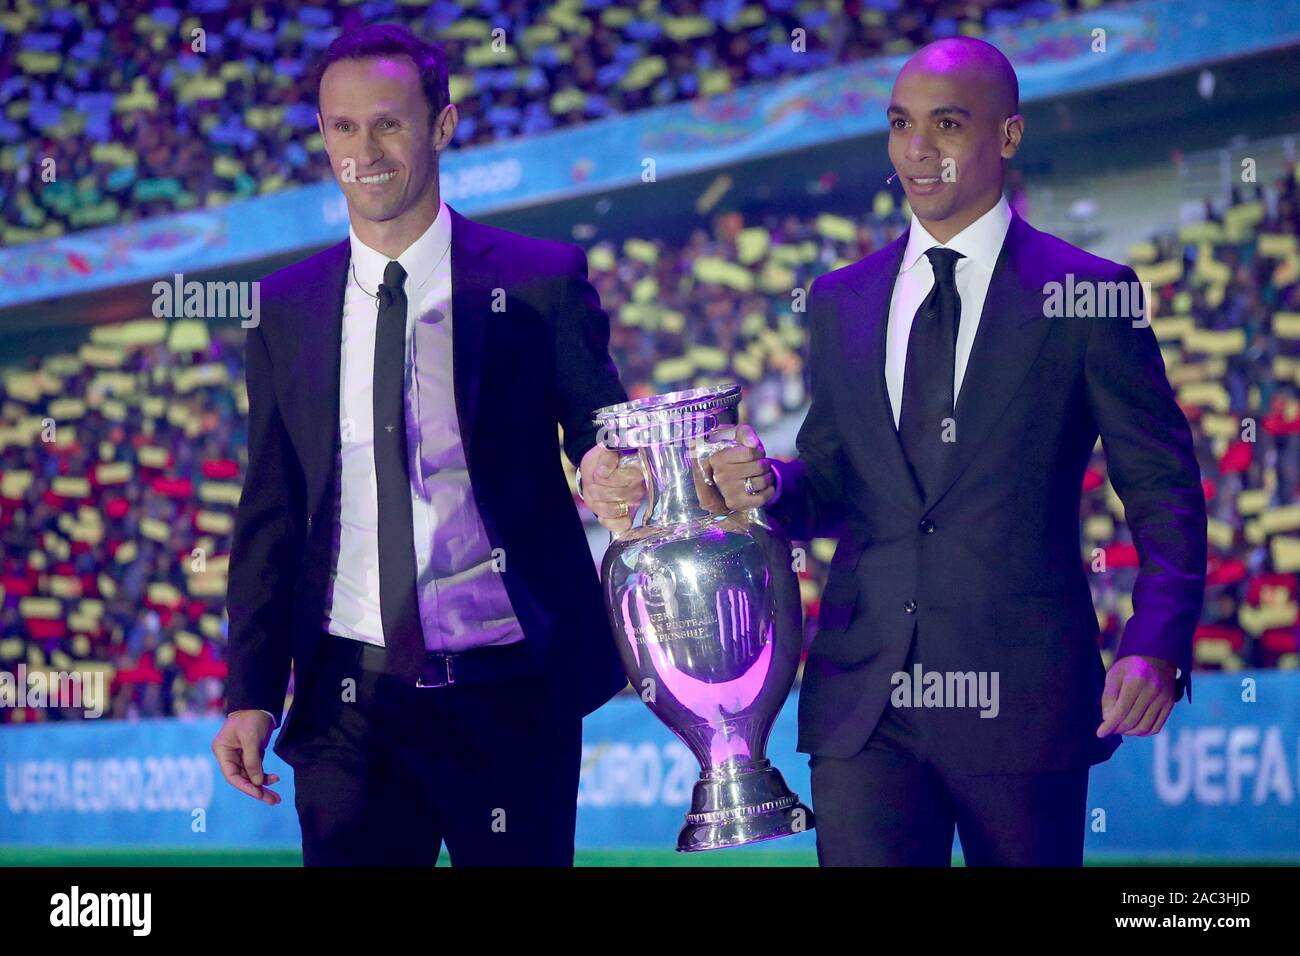 Bukarest, Romania. 30th Nov, 2019. Football, group draw for the European Football Championship 2020 at the Romexpo Exhibition Centre. Ricardo Carvalho (l), former footballer from Portugal, and Joao Mario, footballer from Portugal, bring in the European Cup. UEFA EURO 2020 will take place in twelve countries from 12 June to 12 July 2020. Credit: Christian Charisius/dpa/Alamy Live News Stock Photo